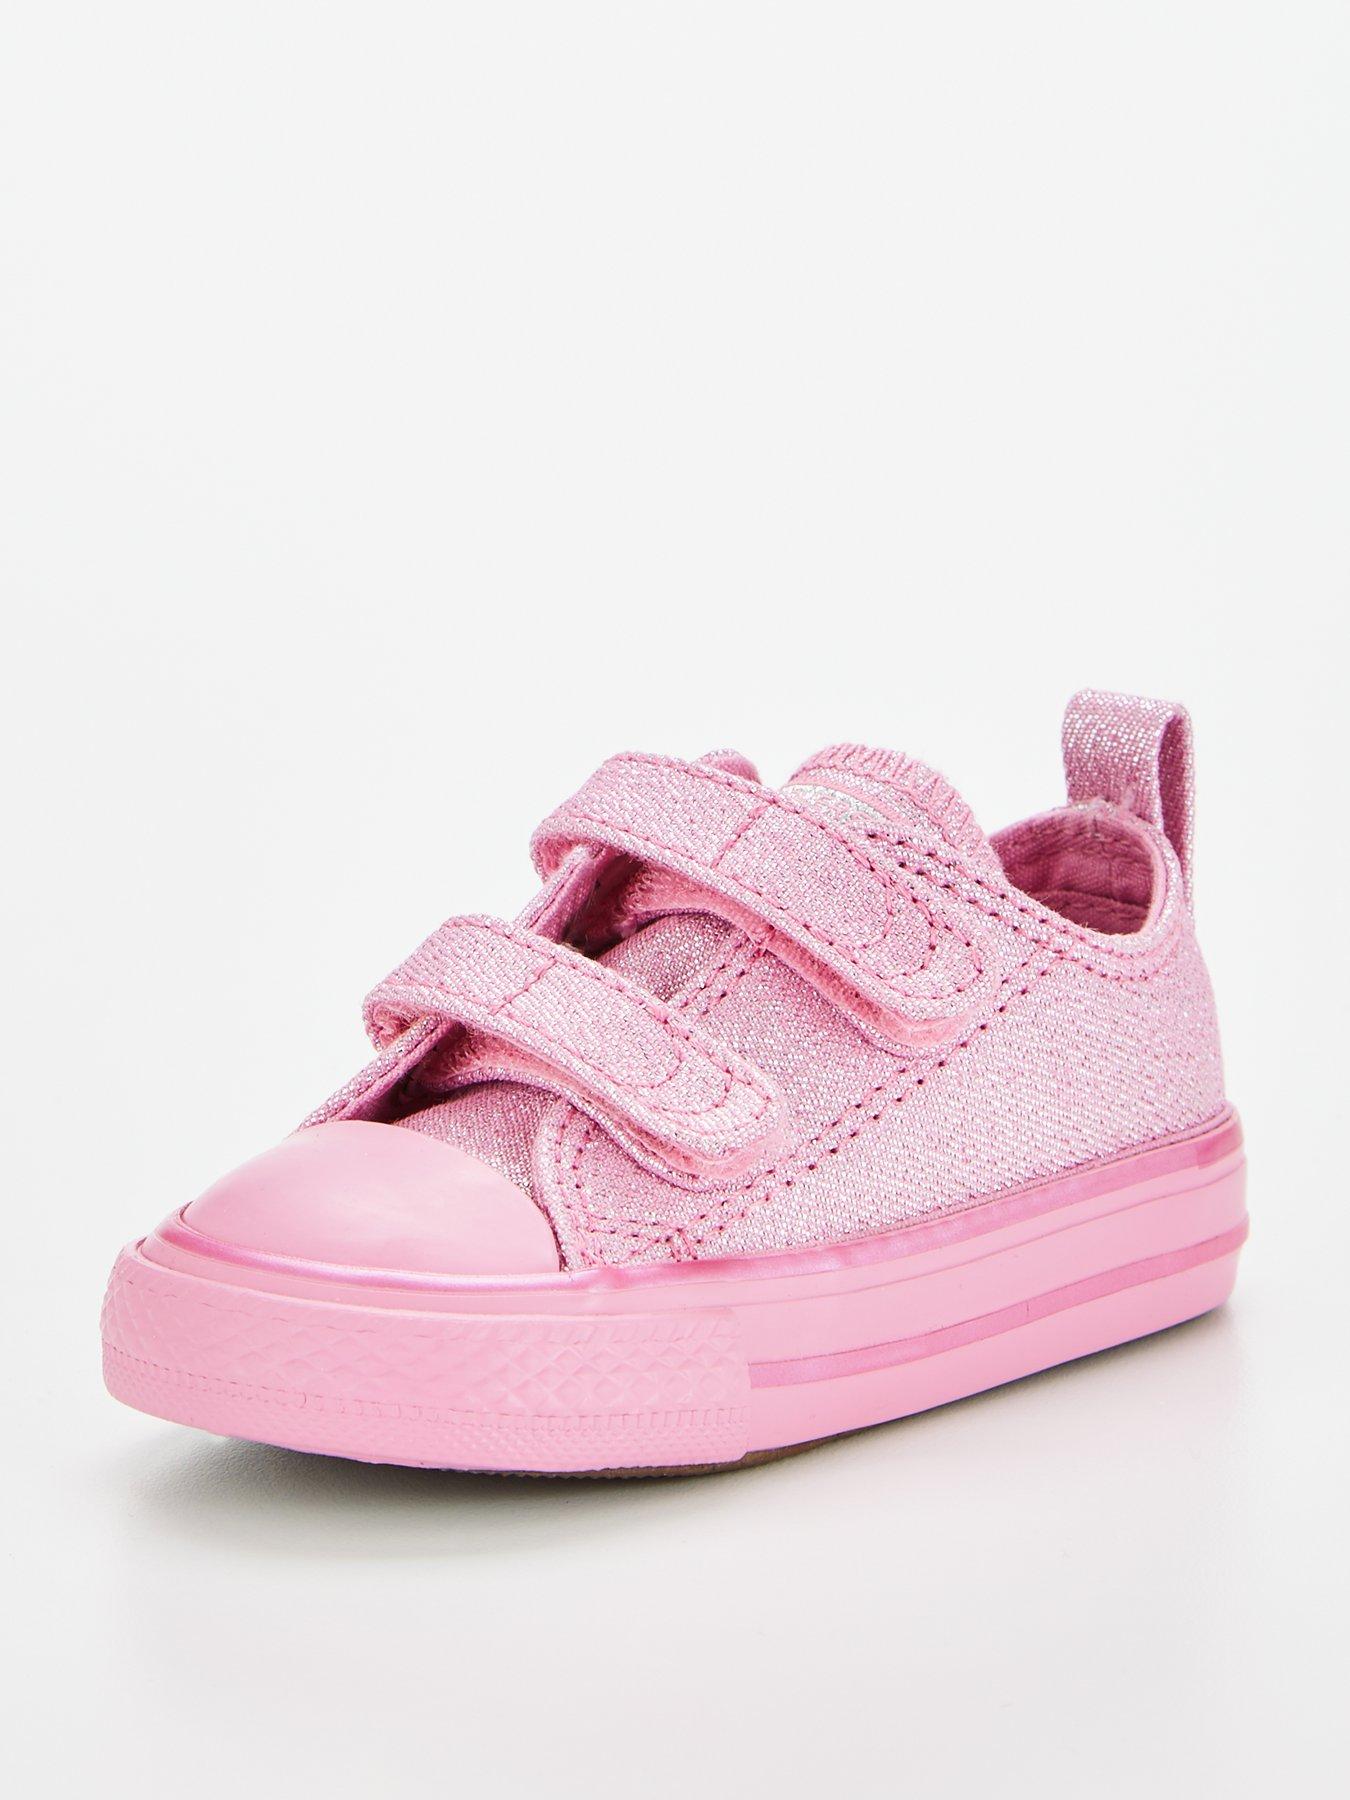 converse all star v trainers infants